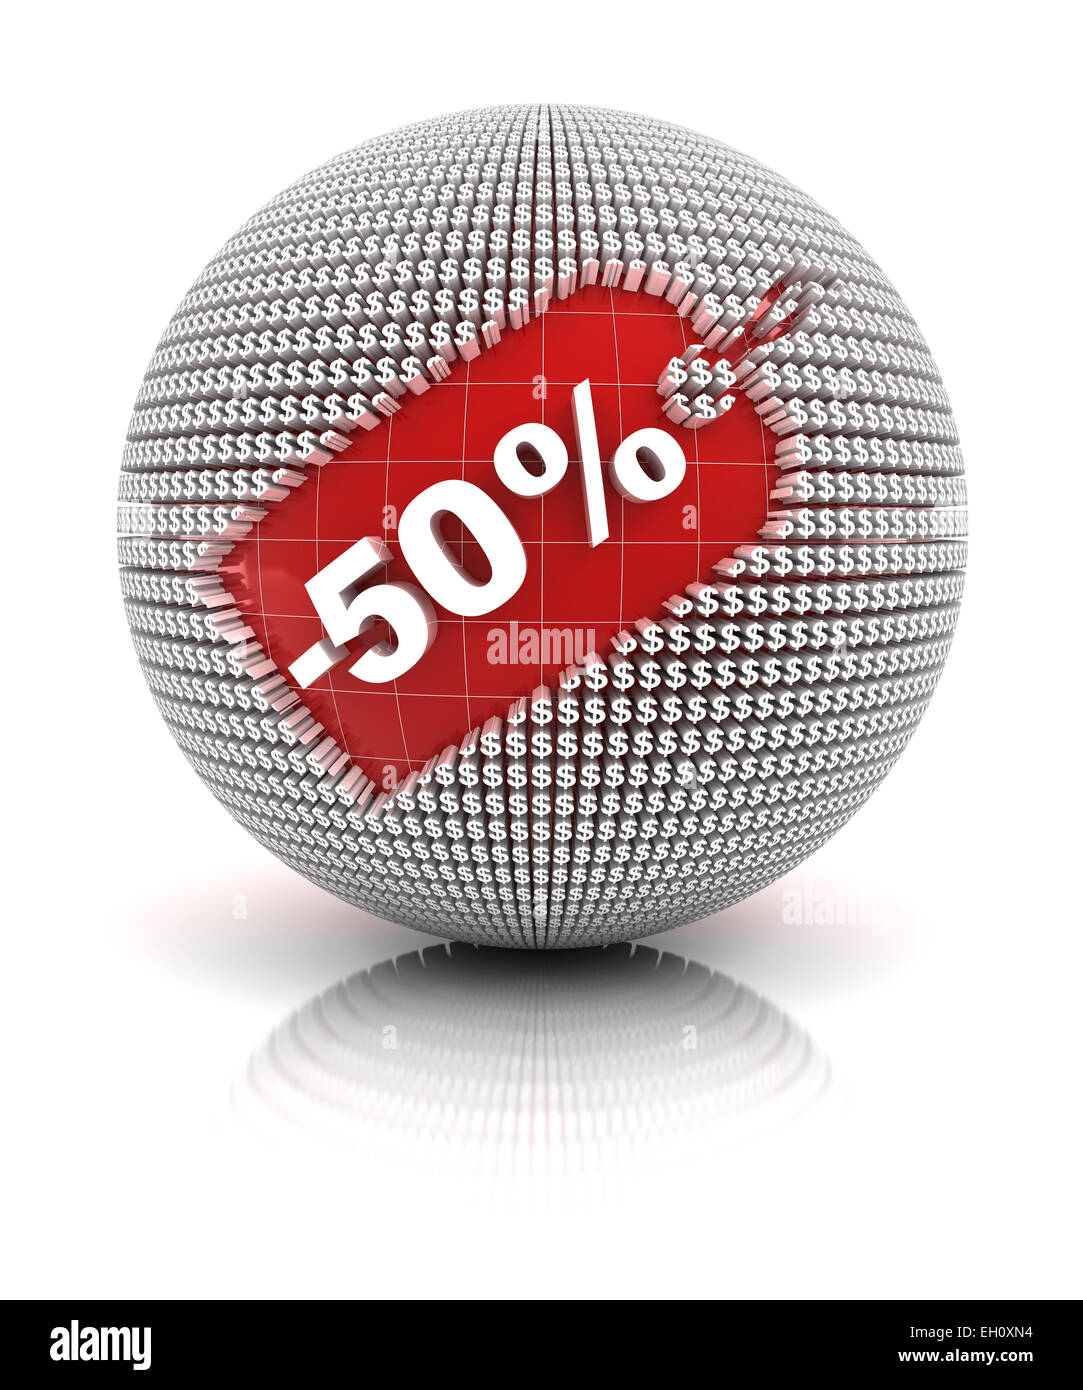 50 percent off sale tag on a sphere Stock Photo